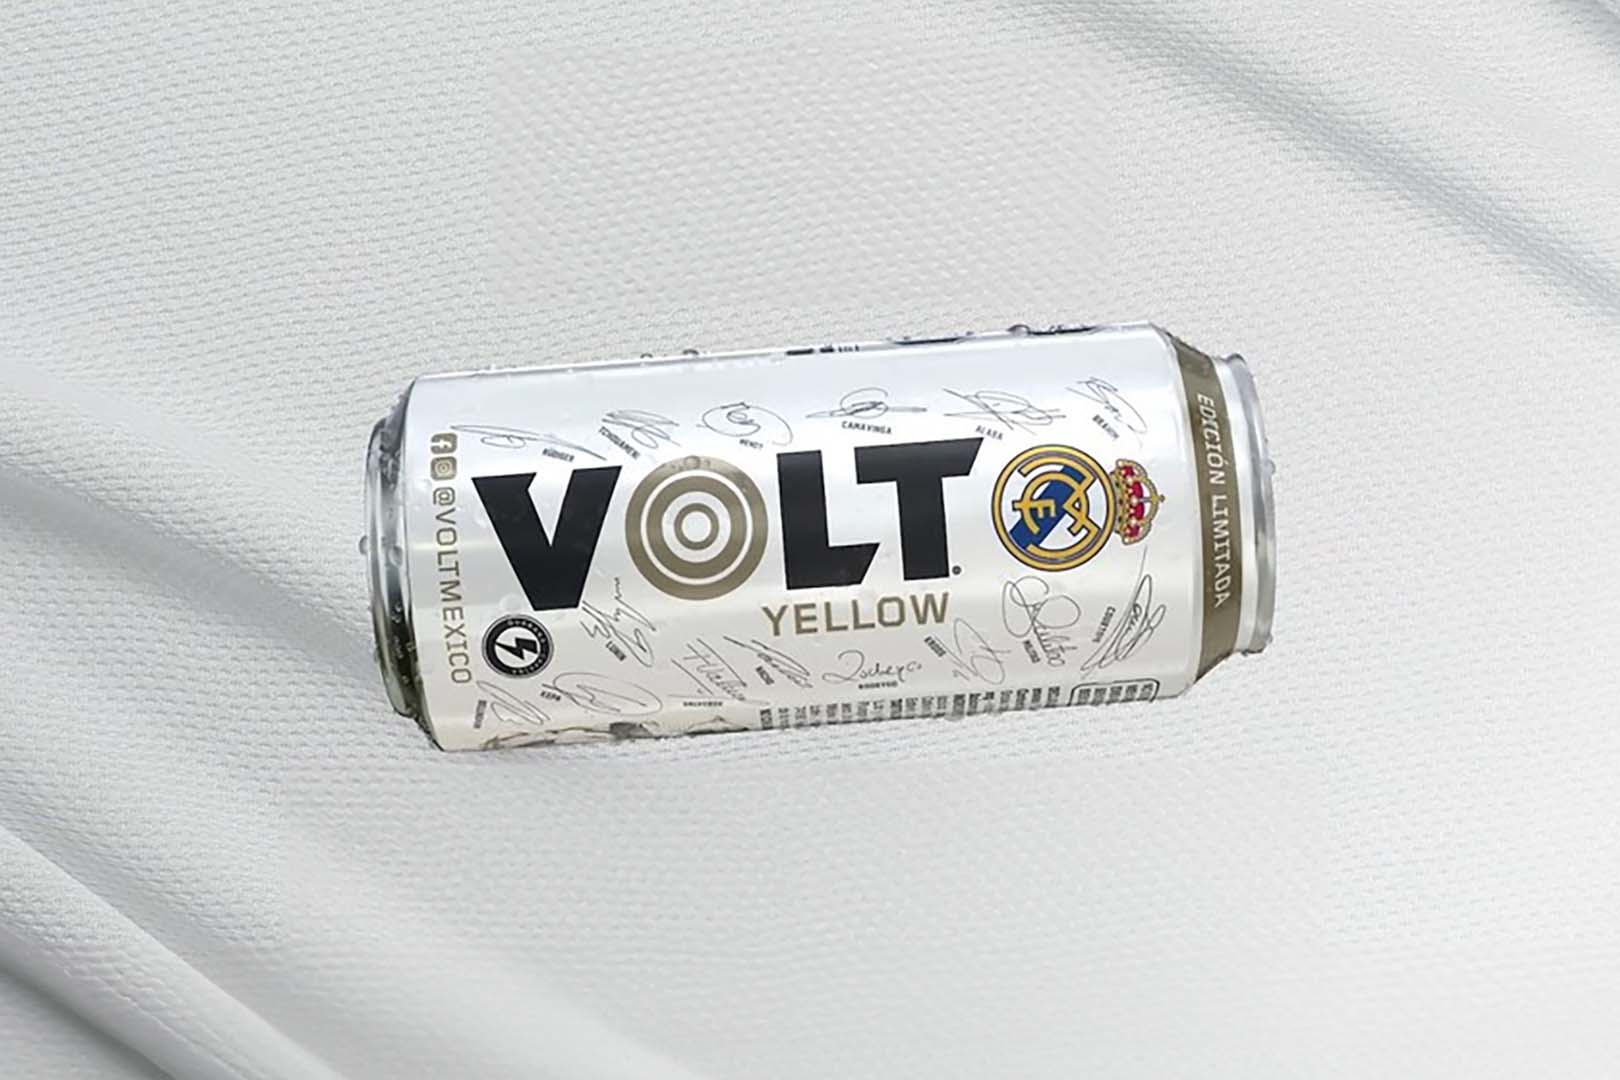 Real Madrid Edition Yellow Volt Energy Drink